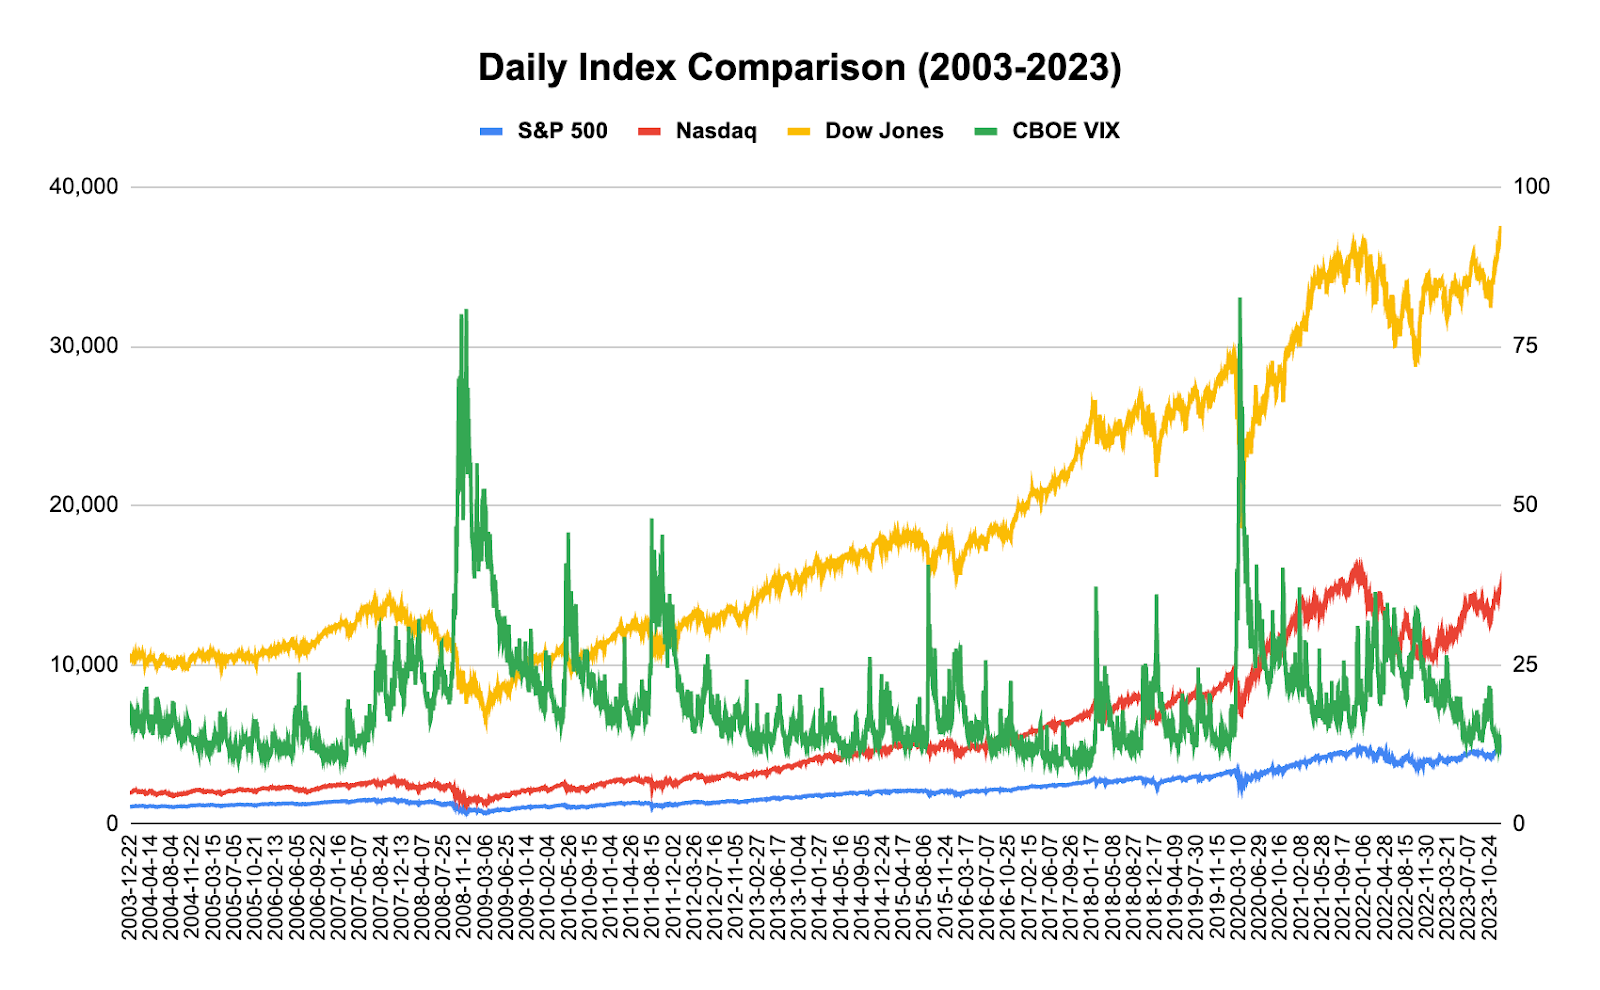 Daily Index Comparison chart from 2003 to 2023